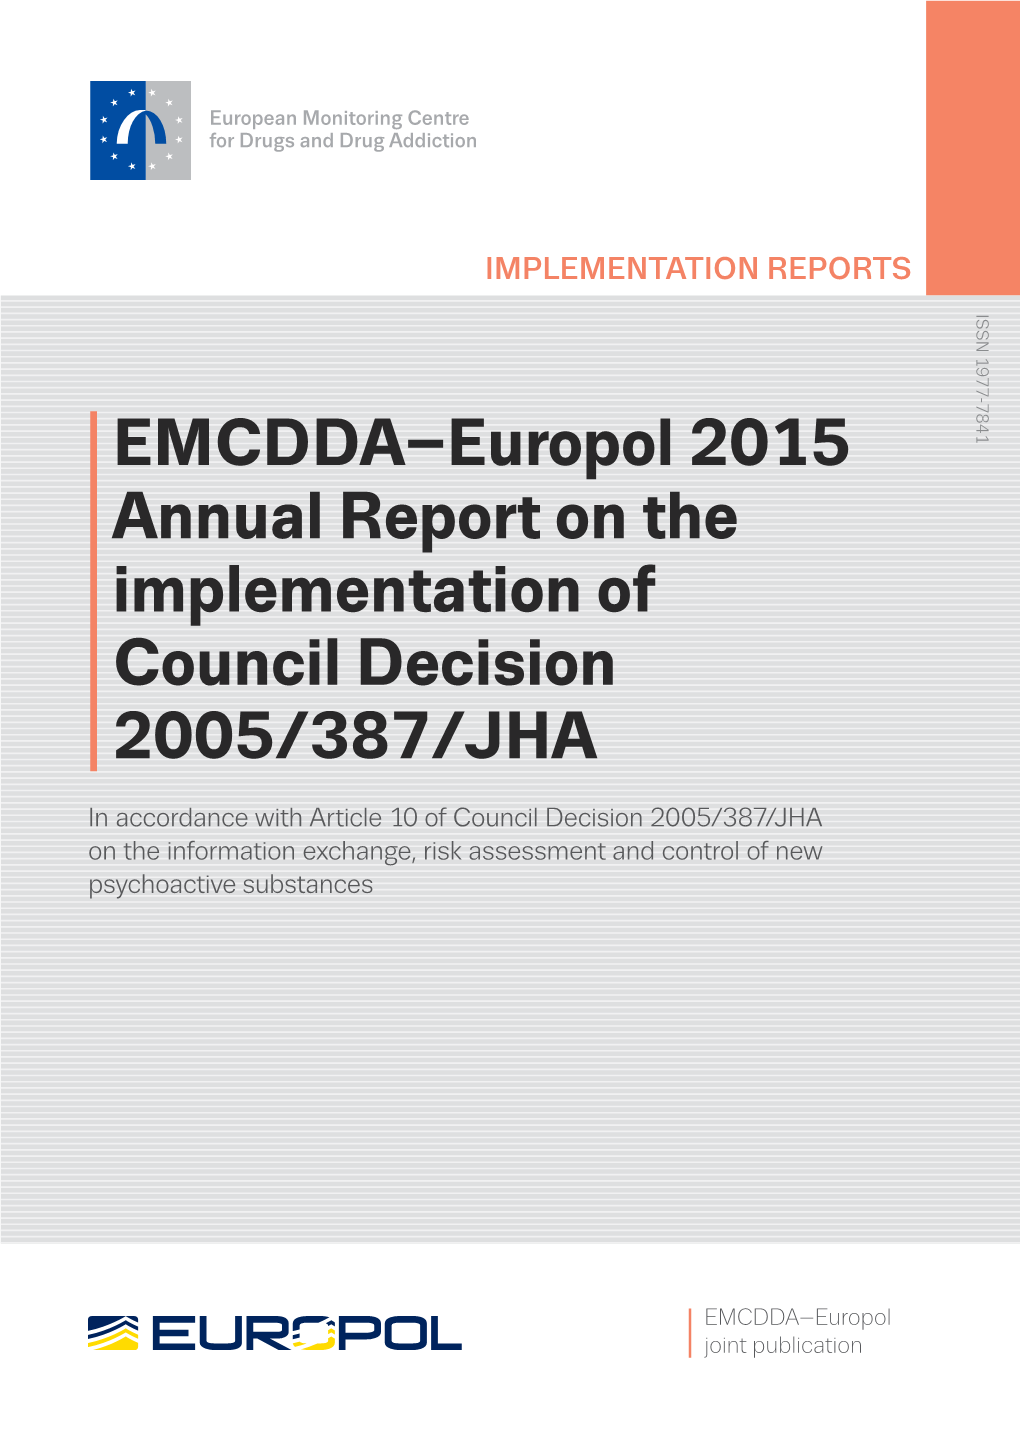 EMCDDA–Europol 2015 Annual Report on the Implementation of Council Decision 2005/387/JHA, Implementation Reports, Publications Officeof the European Union, Luxembourg